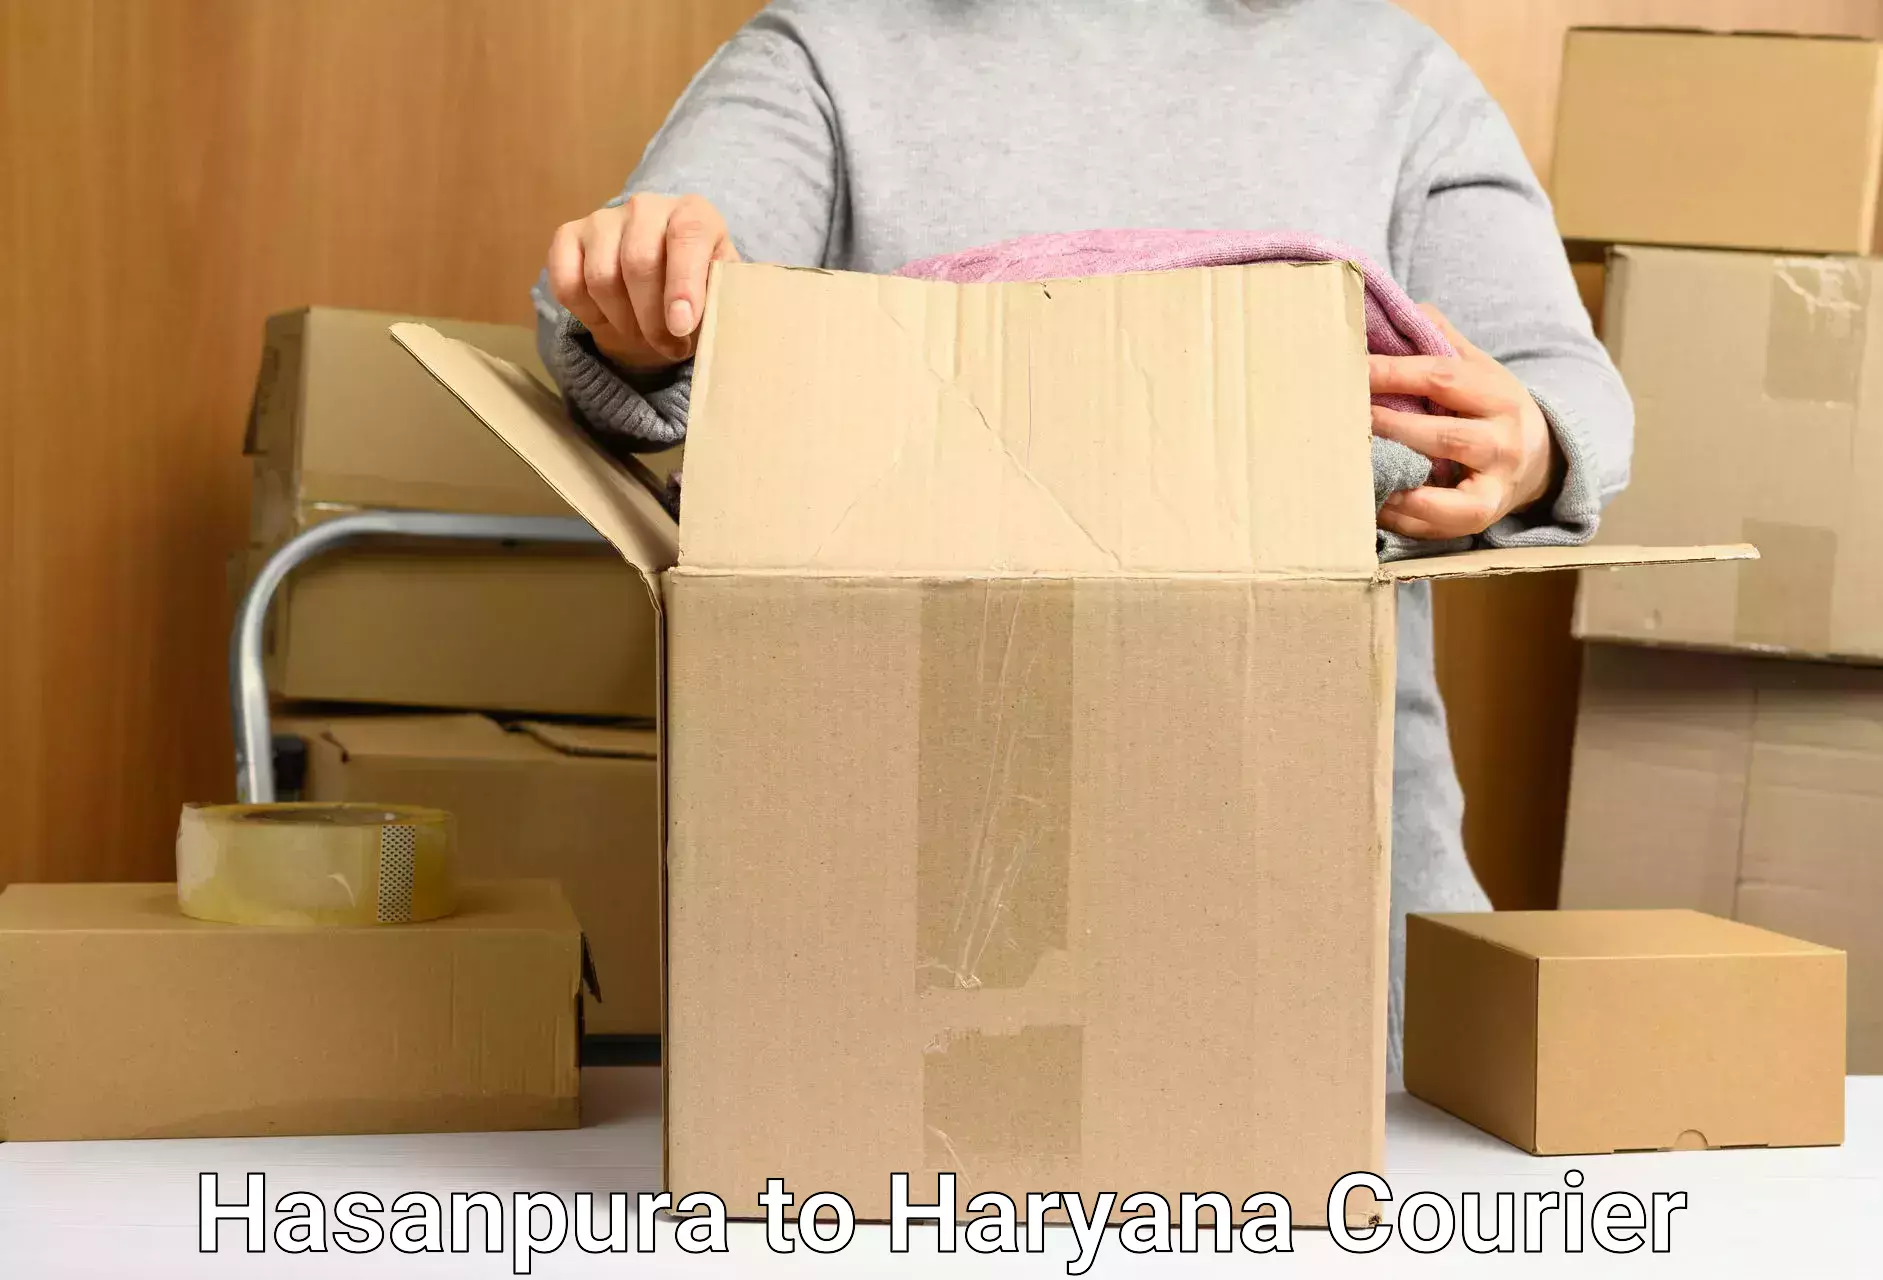 Advanced parcel tracking in Hasanpura to Haryana